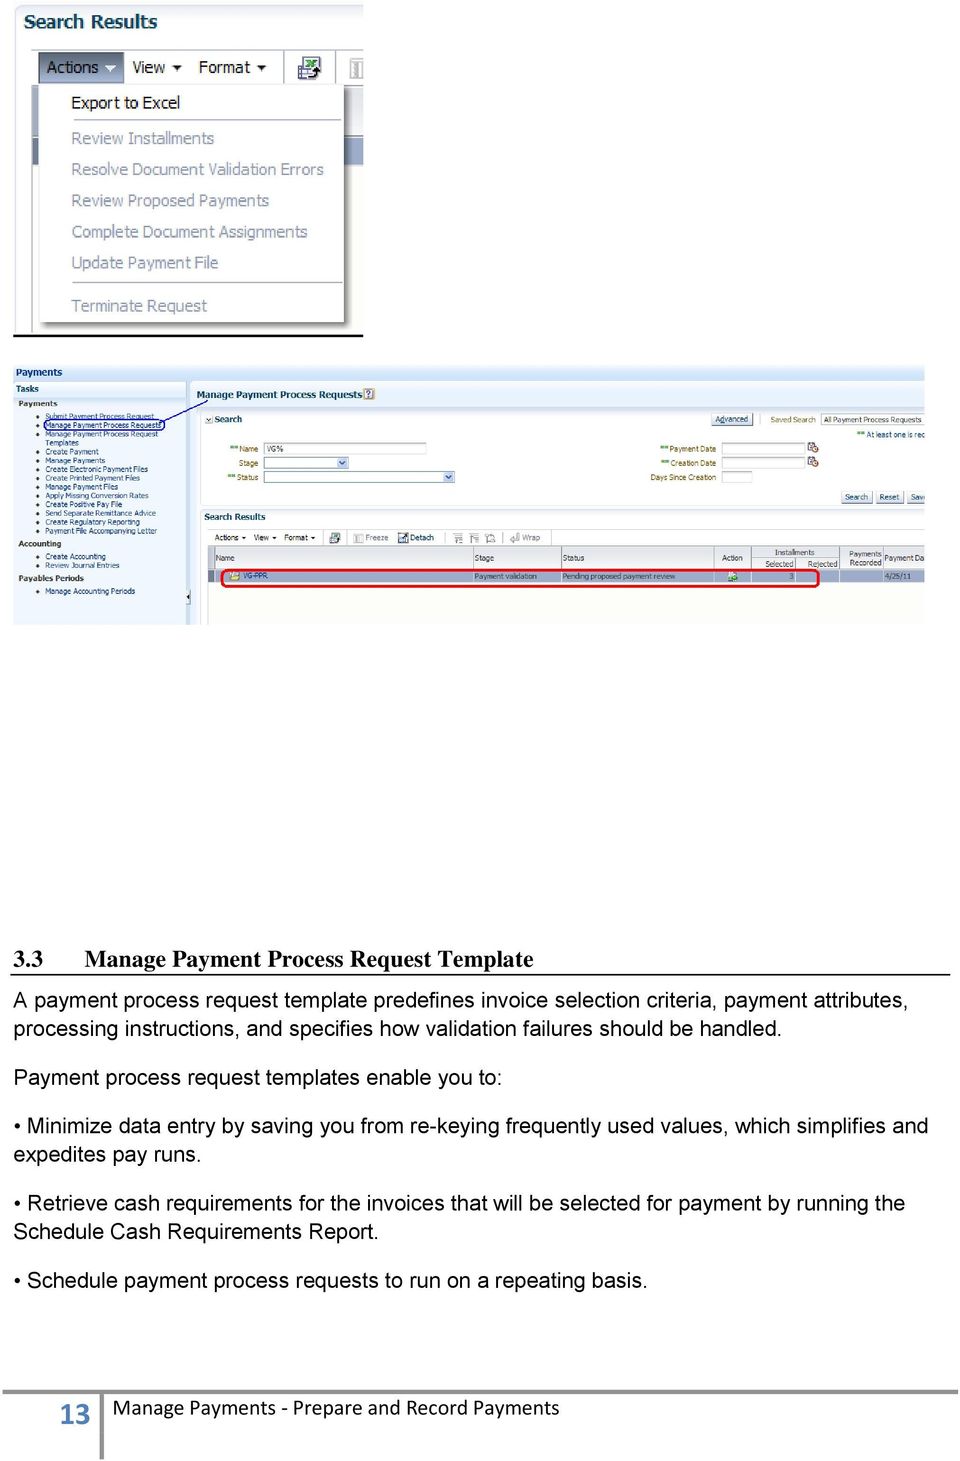 Payment process request templates enable you to: Minimize data entry by saving you from re-keying frequently used values, which simplifies and